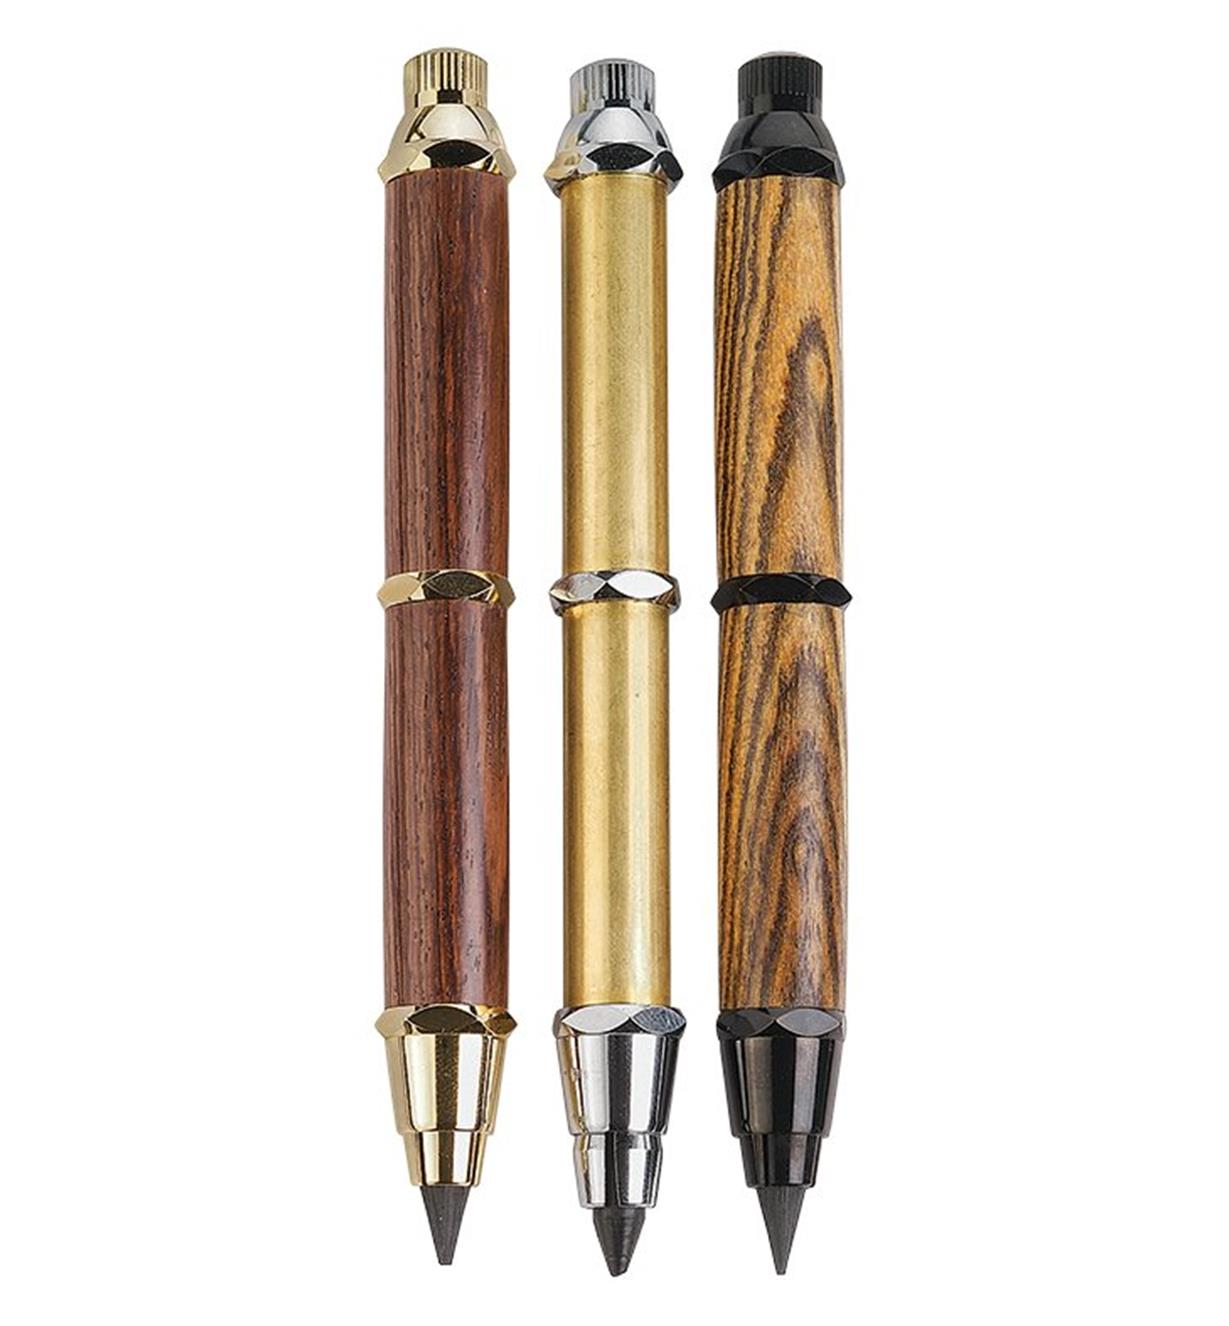 Examples of completed gold and black chrome Woodworker's Sketch Pencils with chrome hardware between them